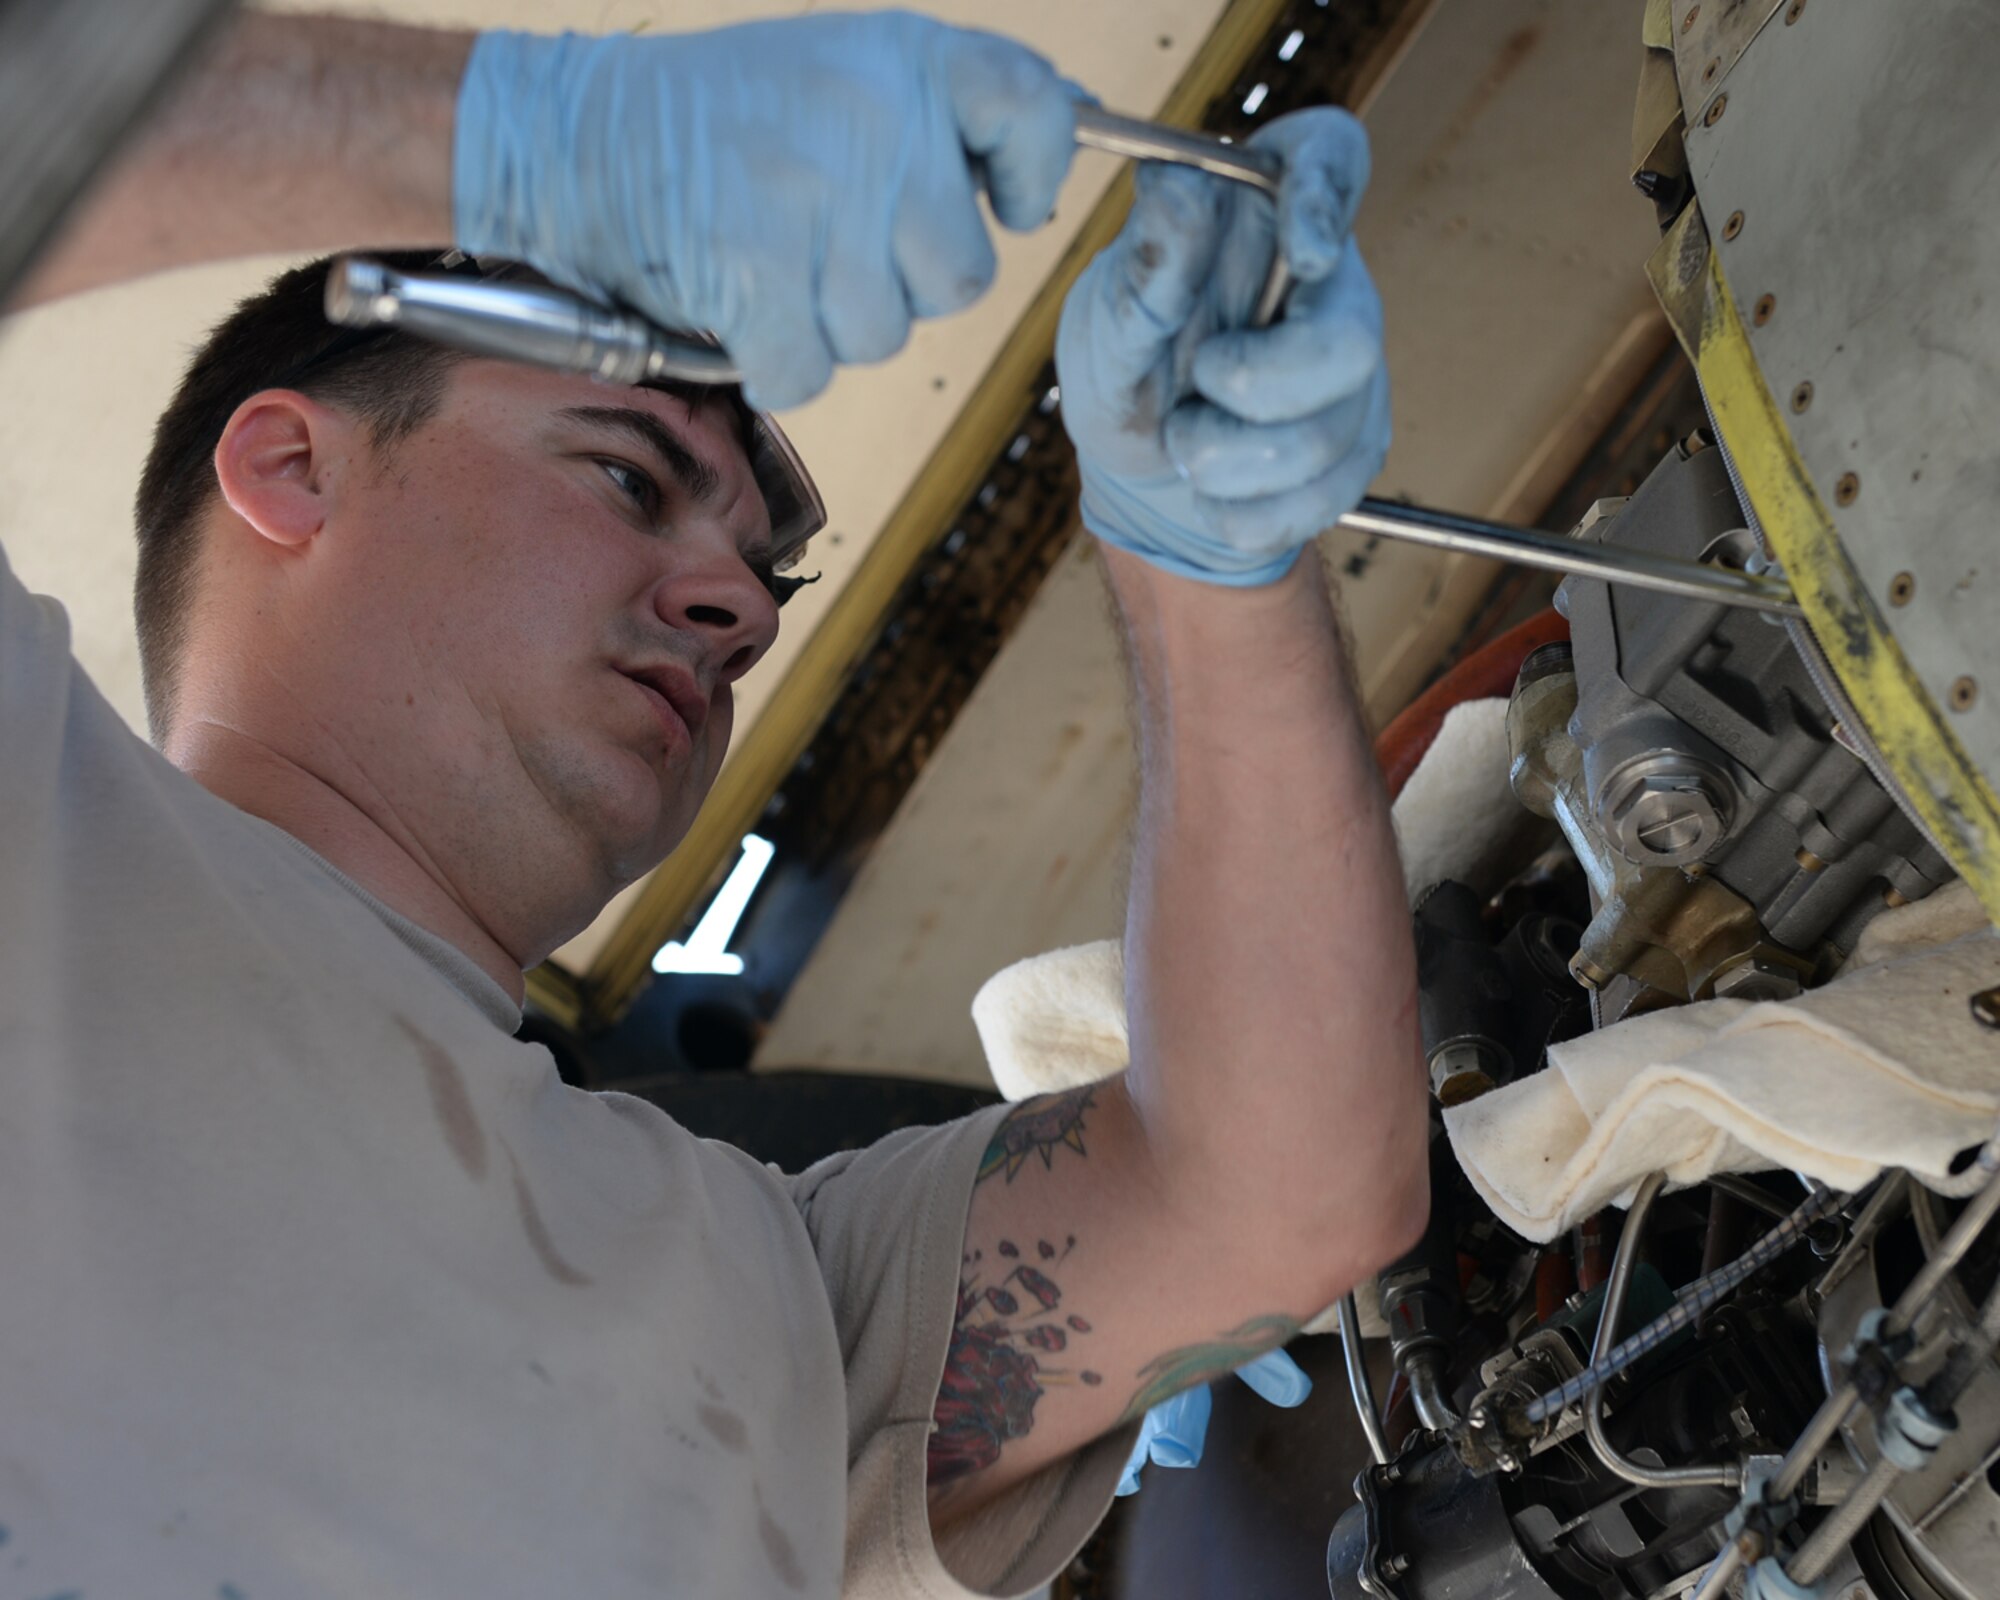 A U.S. Air Force maintenance Airman assigned to the 354th Expeditionary Fighter Squadron replaces a hydro-pump during a theater security package deployment at Sliac Air Base, Slovakia, May 19, 2015. As part of the deployment, the U.S. and Slovakia air forces will train together May 18-22 to improve interoperability in allied air operations and multinational close-air-support operations. (U.S. Air Force photo by Senior Airman Dylan Nuckolls/Released)